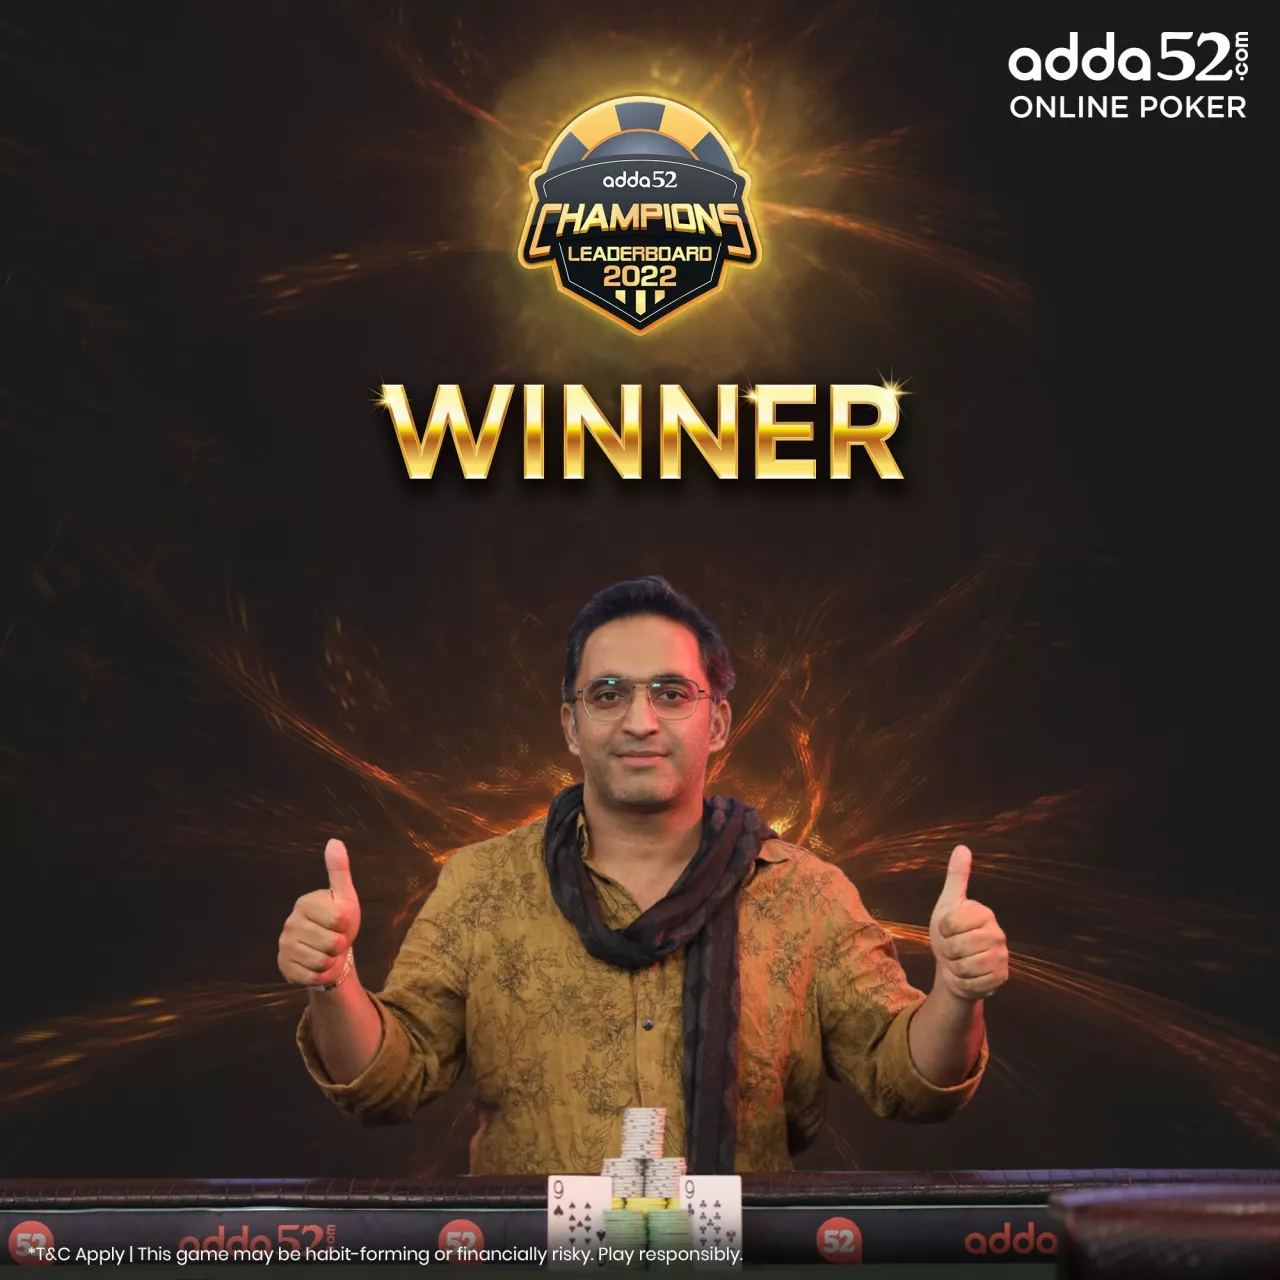 Adda52 Concluded its Biggest Poker Championship - ACL 2.0, Ram Kakkar Emerges as the Winner img#1